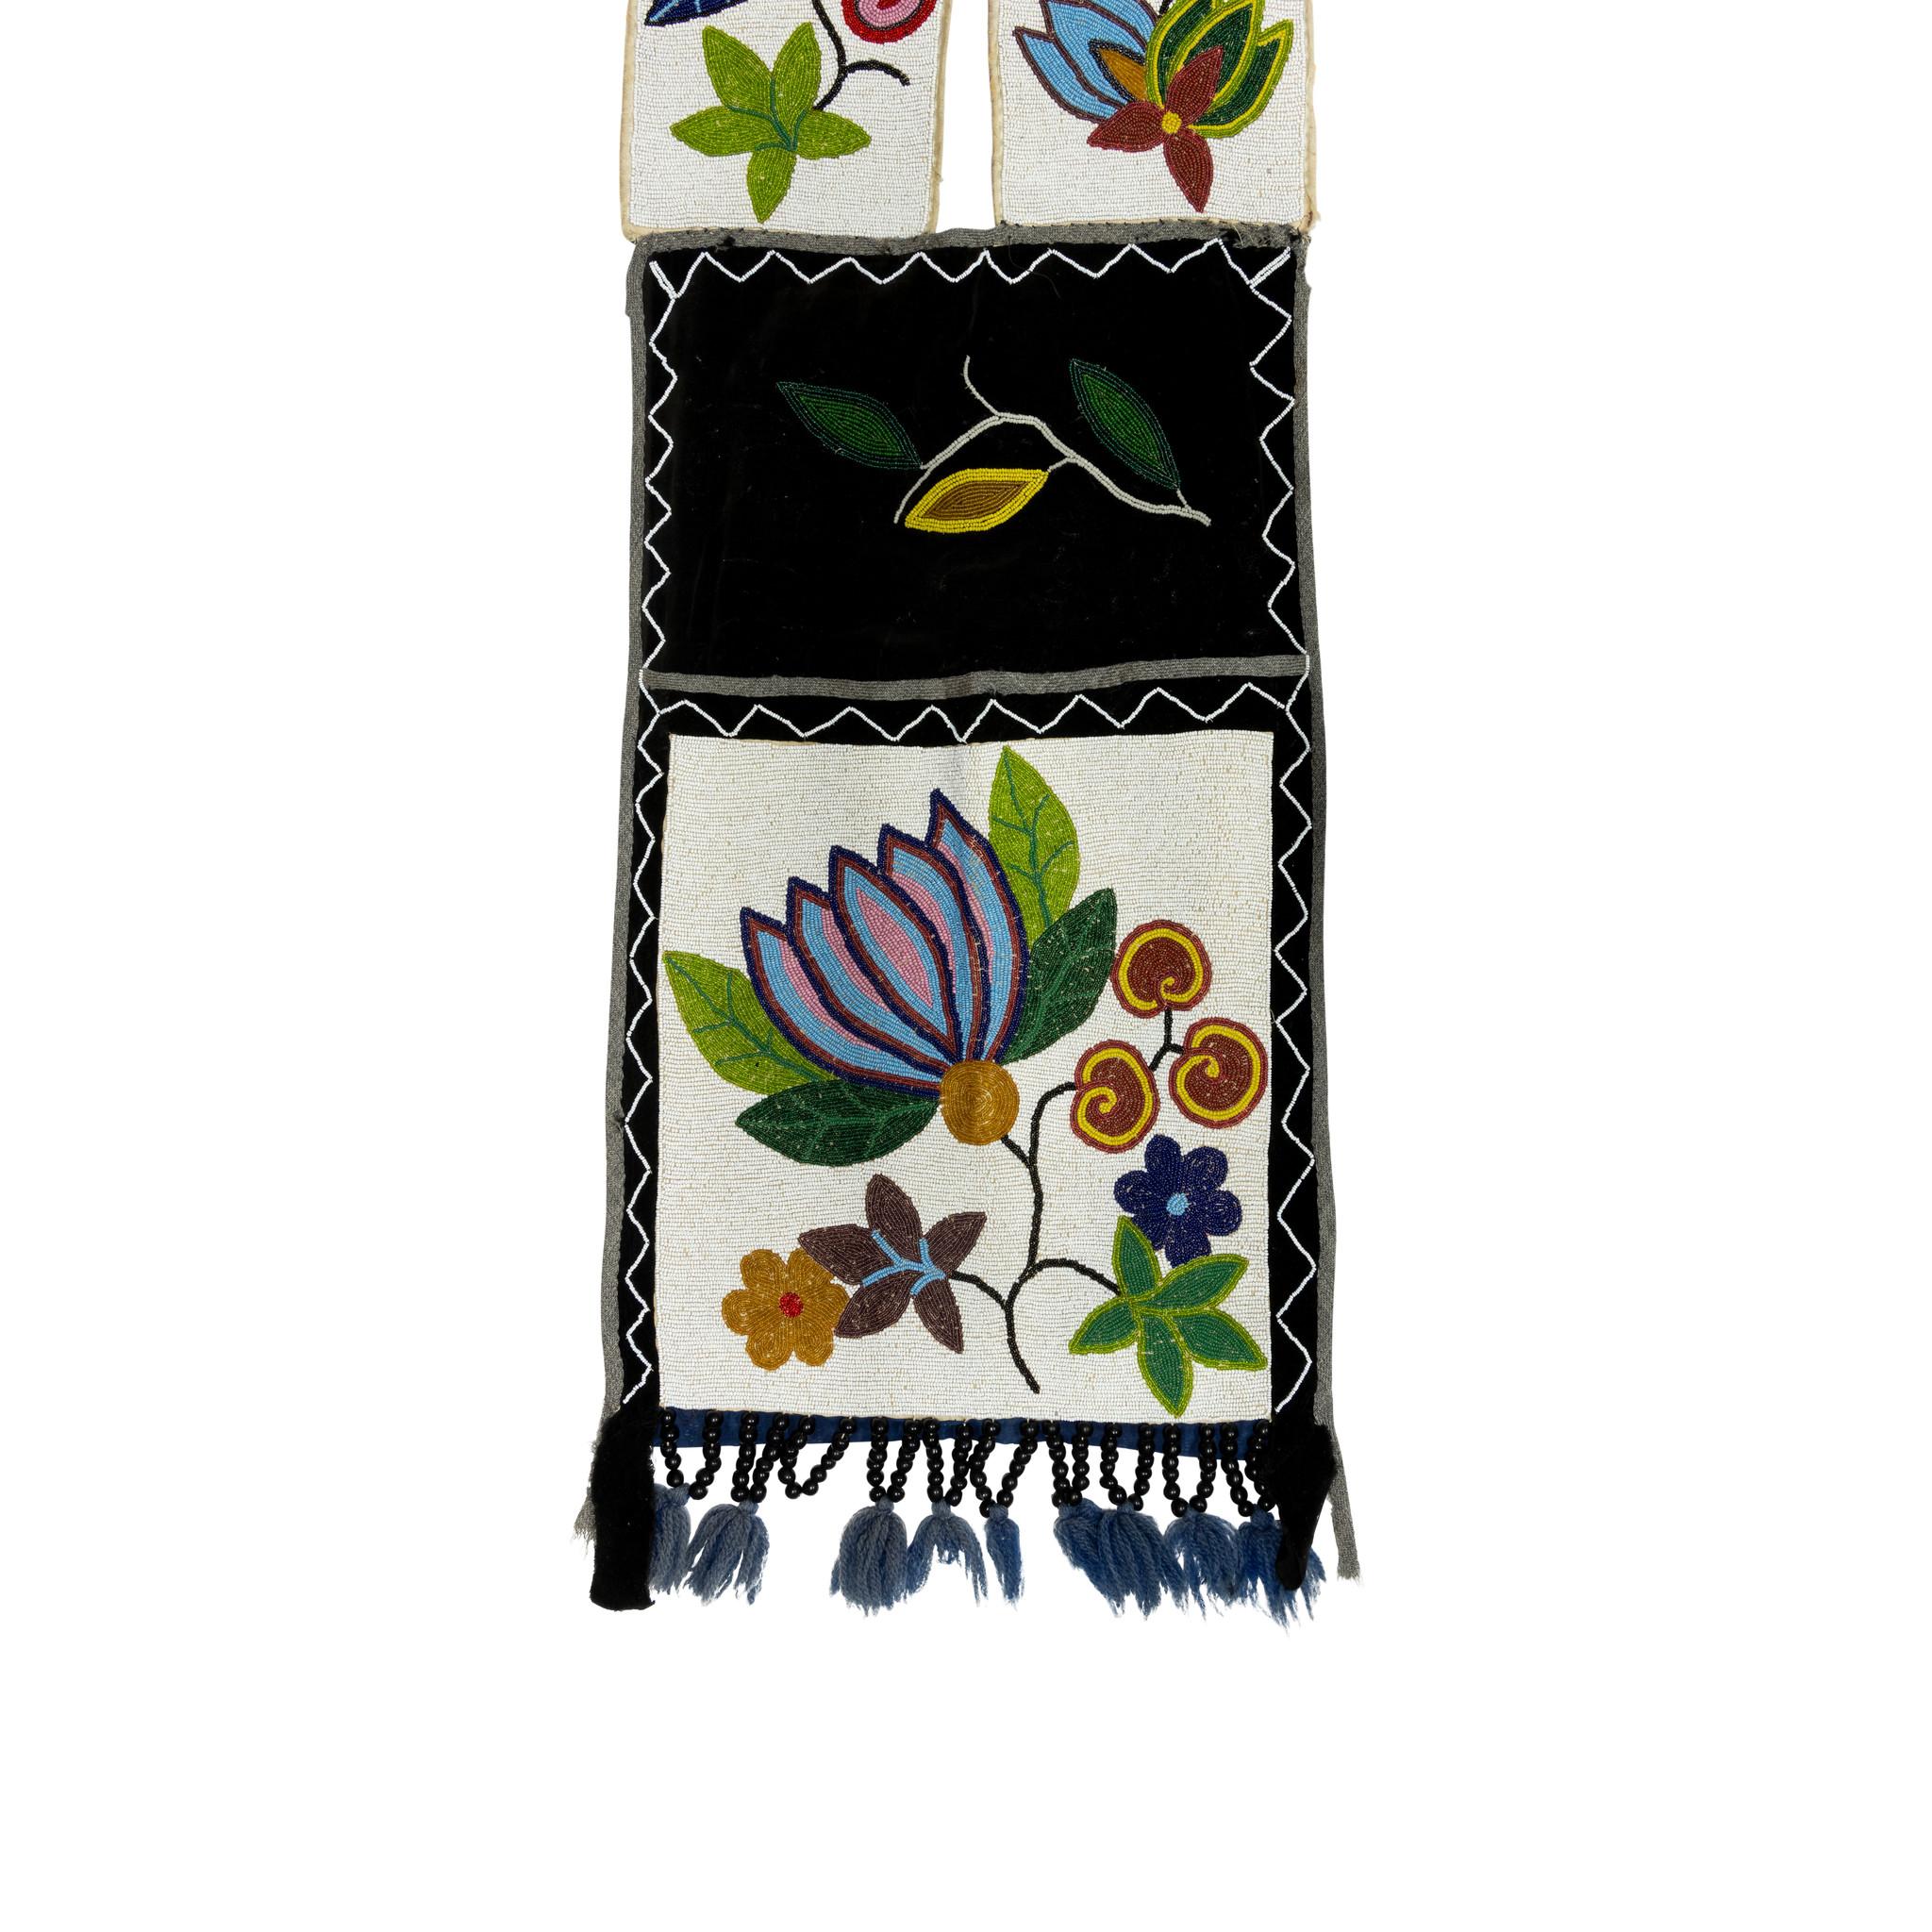 Extra-large Chippewa beaded bandolier bag with full pocket. Black bead drops ending in blue yarn. Bright and visual vintage piece of Native American beadwork. Makes a great wall hanging. 

Period: 19th century
Origin: Chippewa
Size: 14